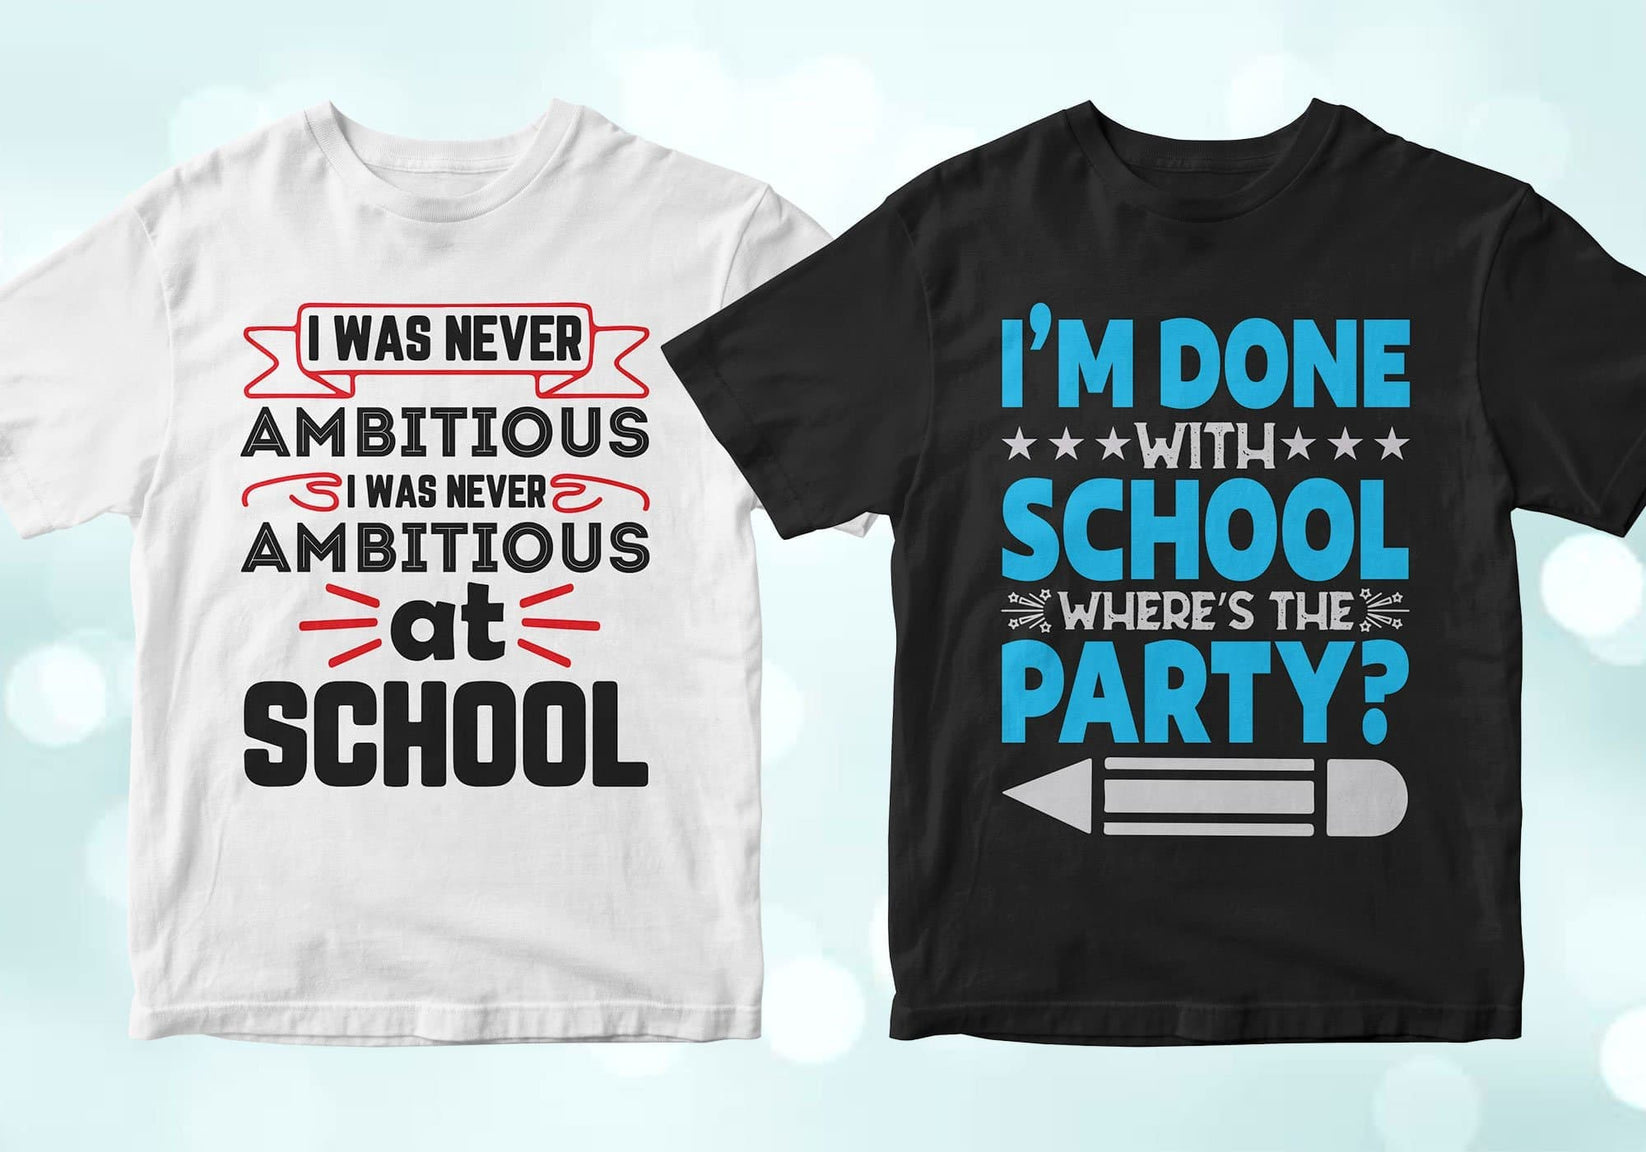 I was never ambitious at school, I'm done with school where's the party?